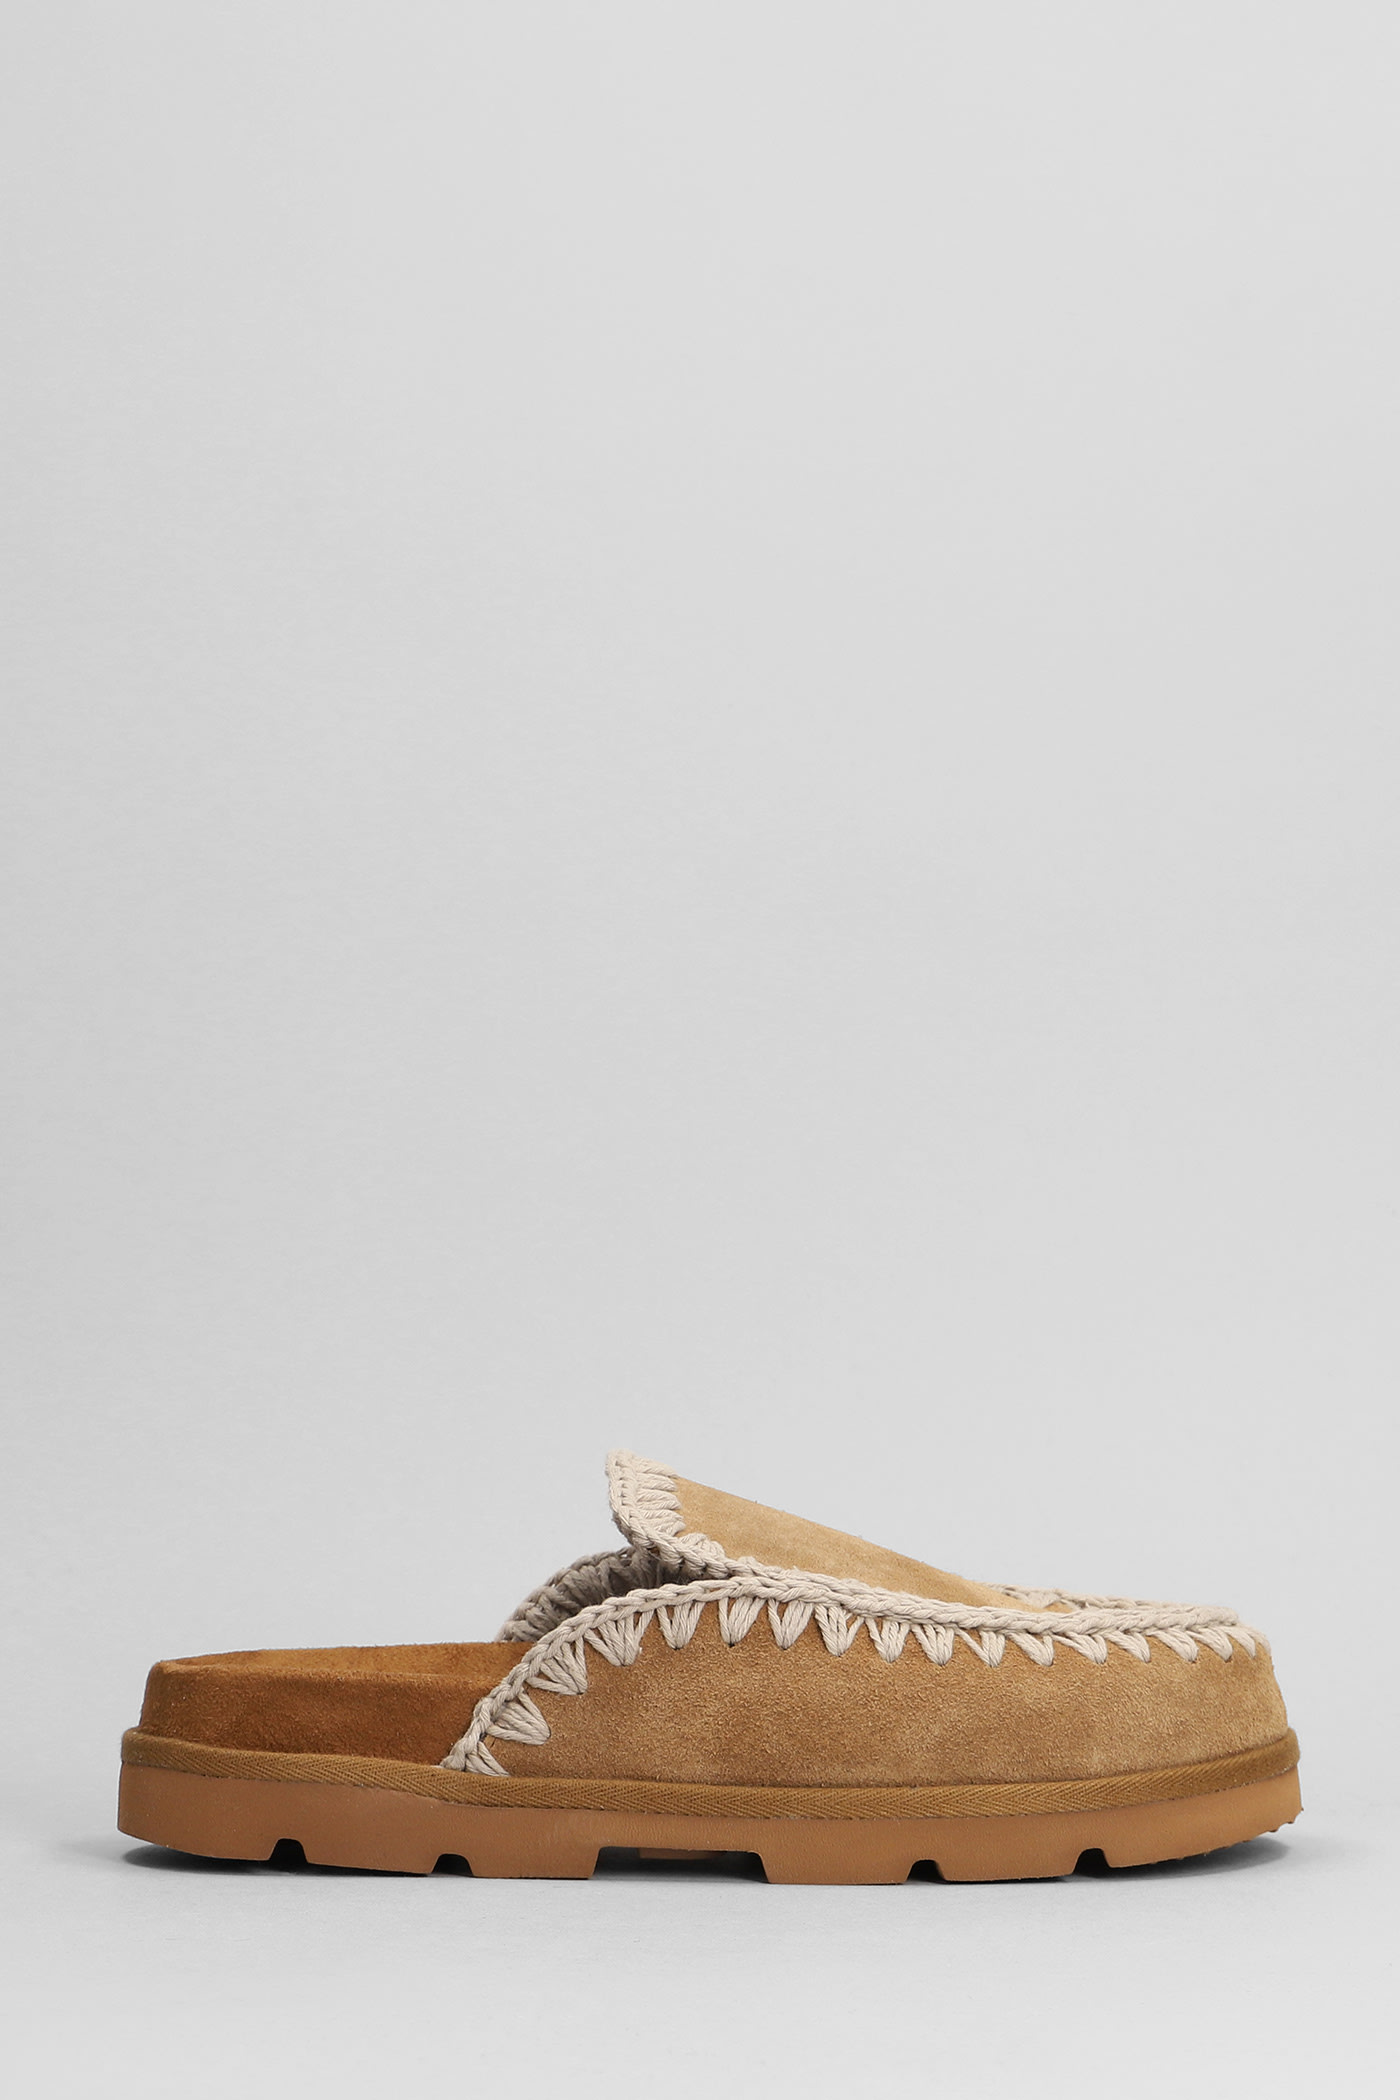 MOU LOW BIO SABOT SLIPPER-MULE IN LEATHER COLOR SUEDE